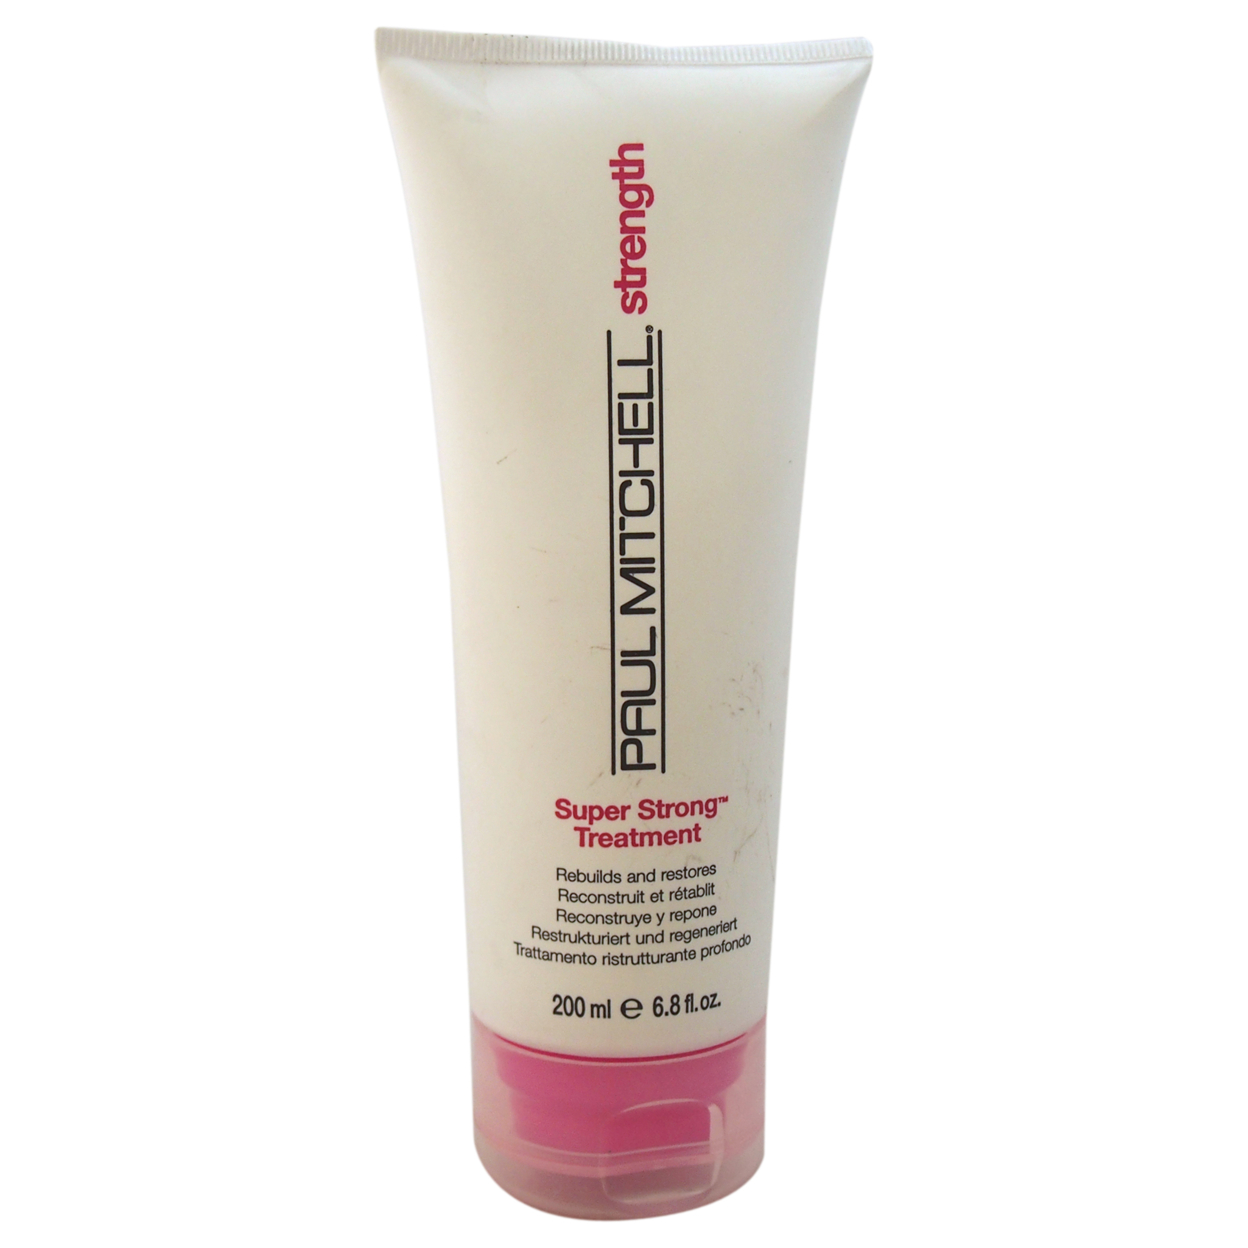 Paul Mitchell Super Strong Treatment - image 1 of 2